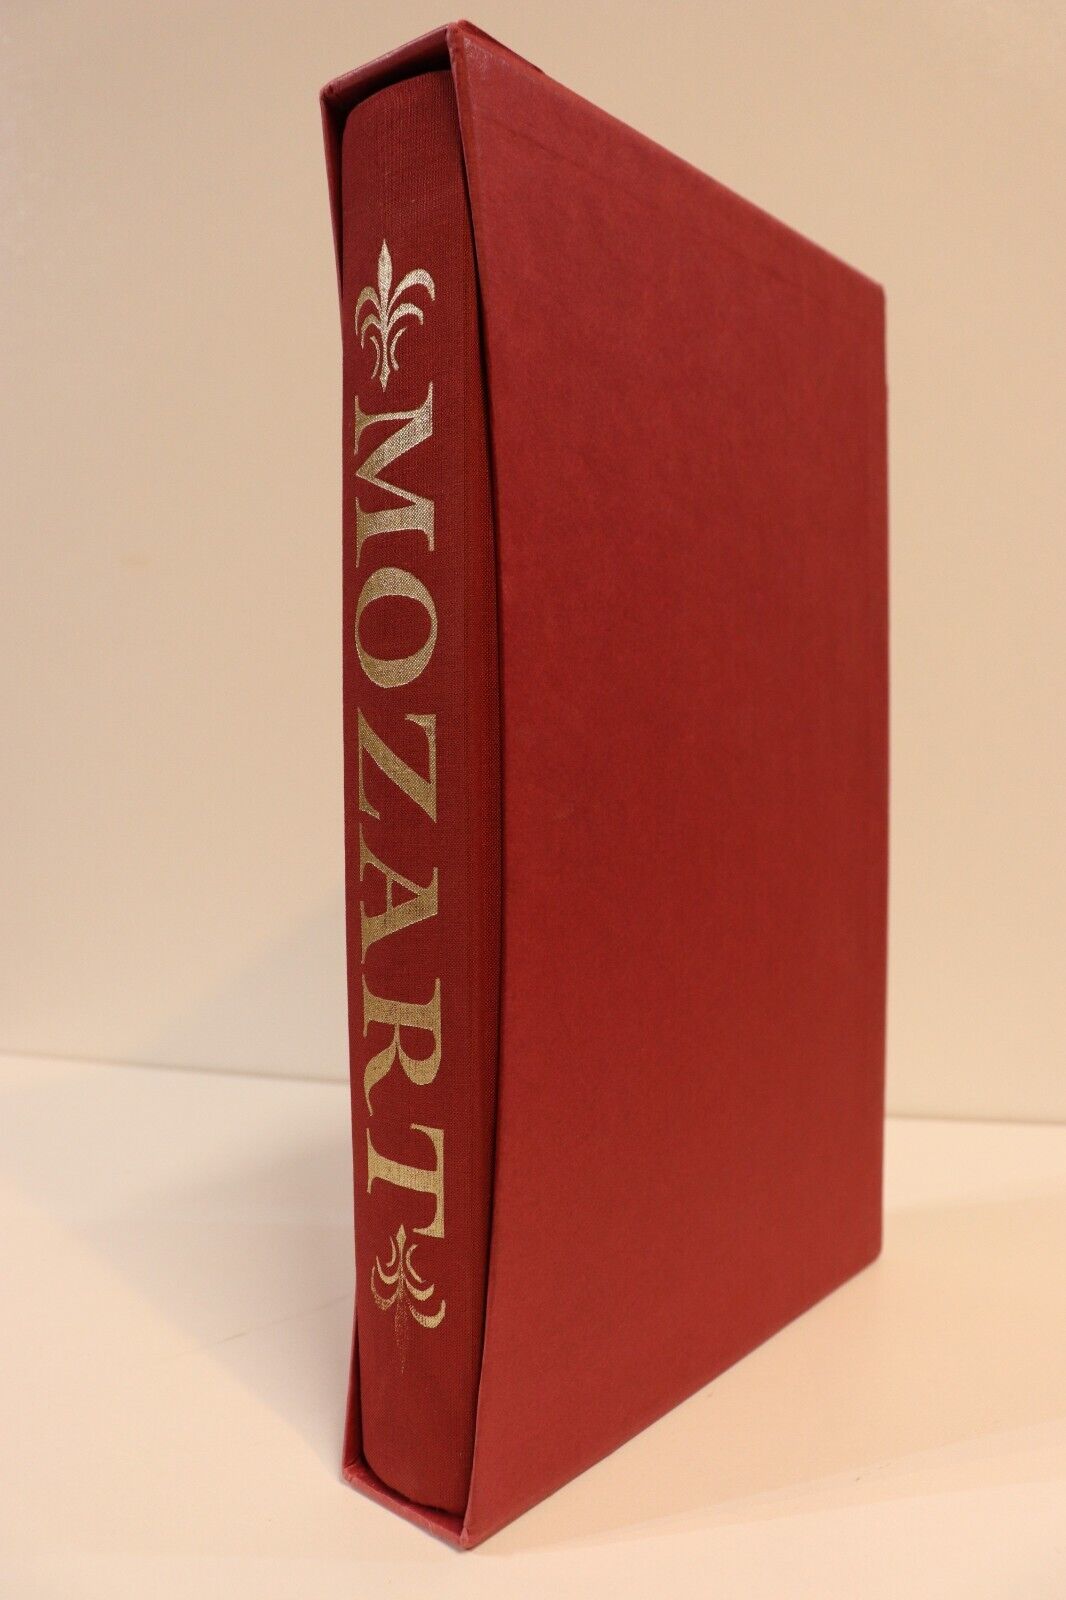 The Life Of Mozart by Edward Holmes - 1991 - Folio Society - Music History Book